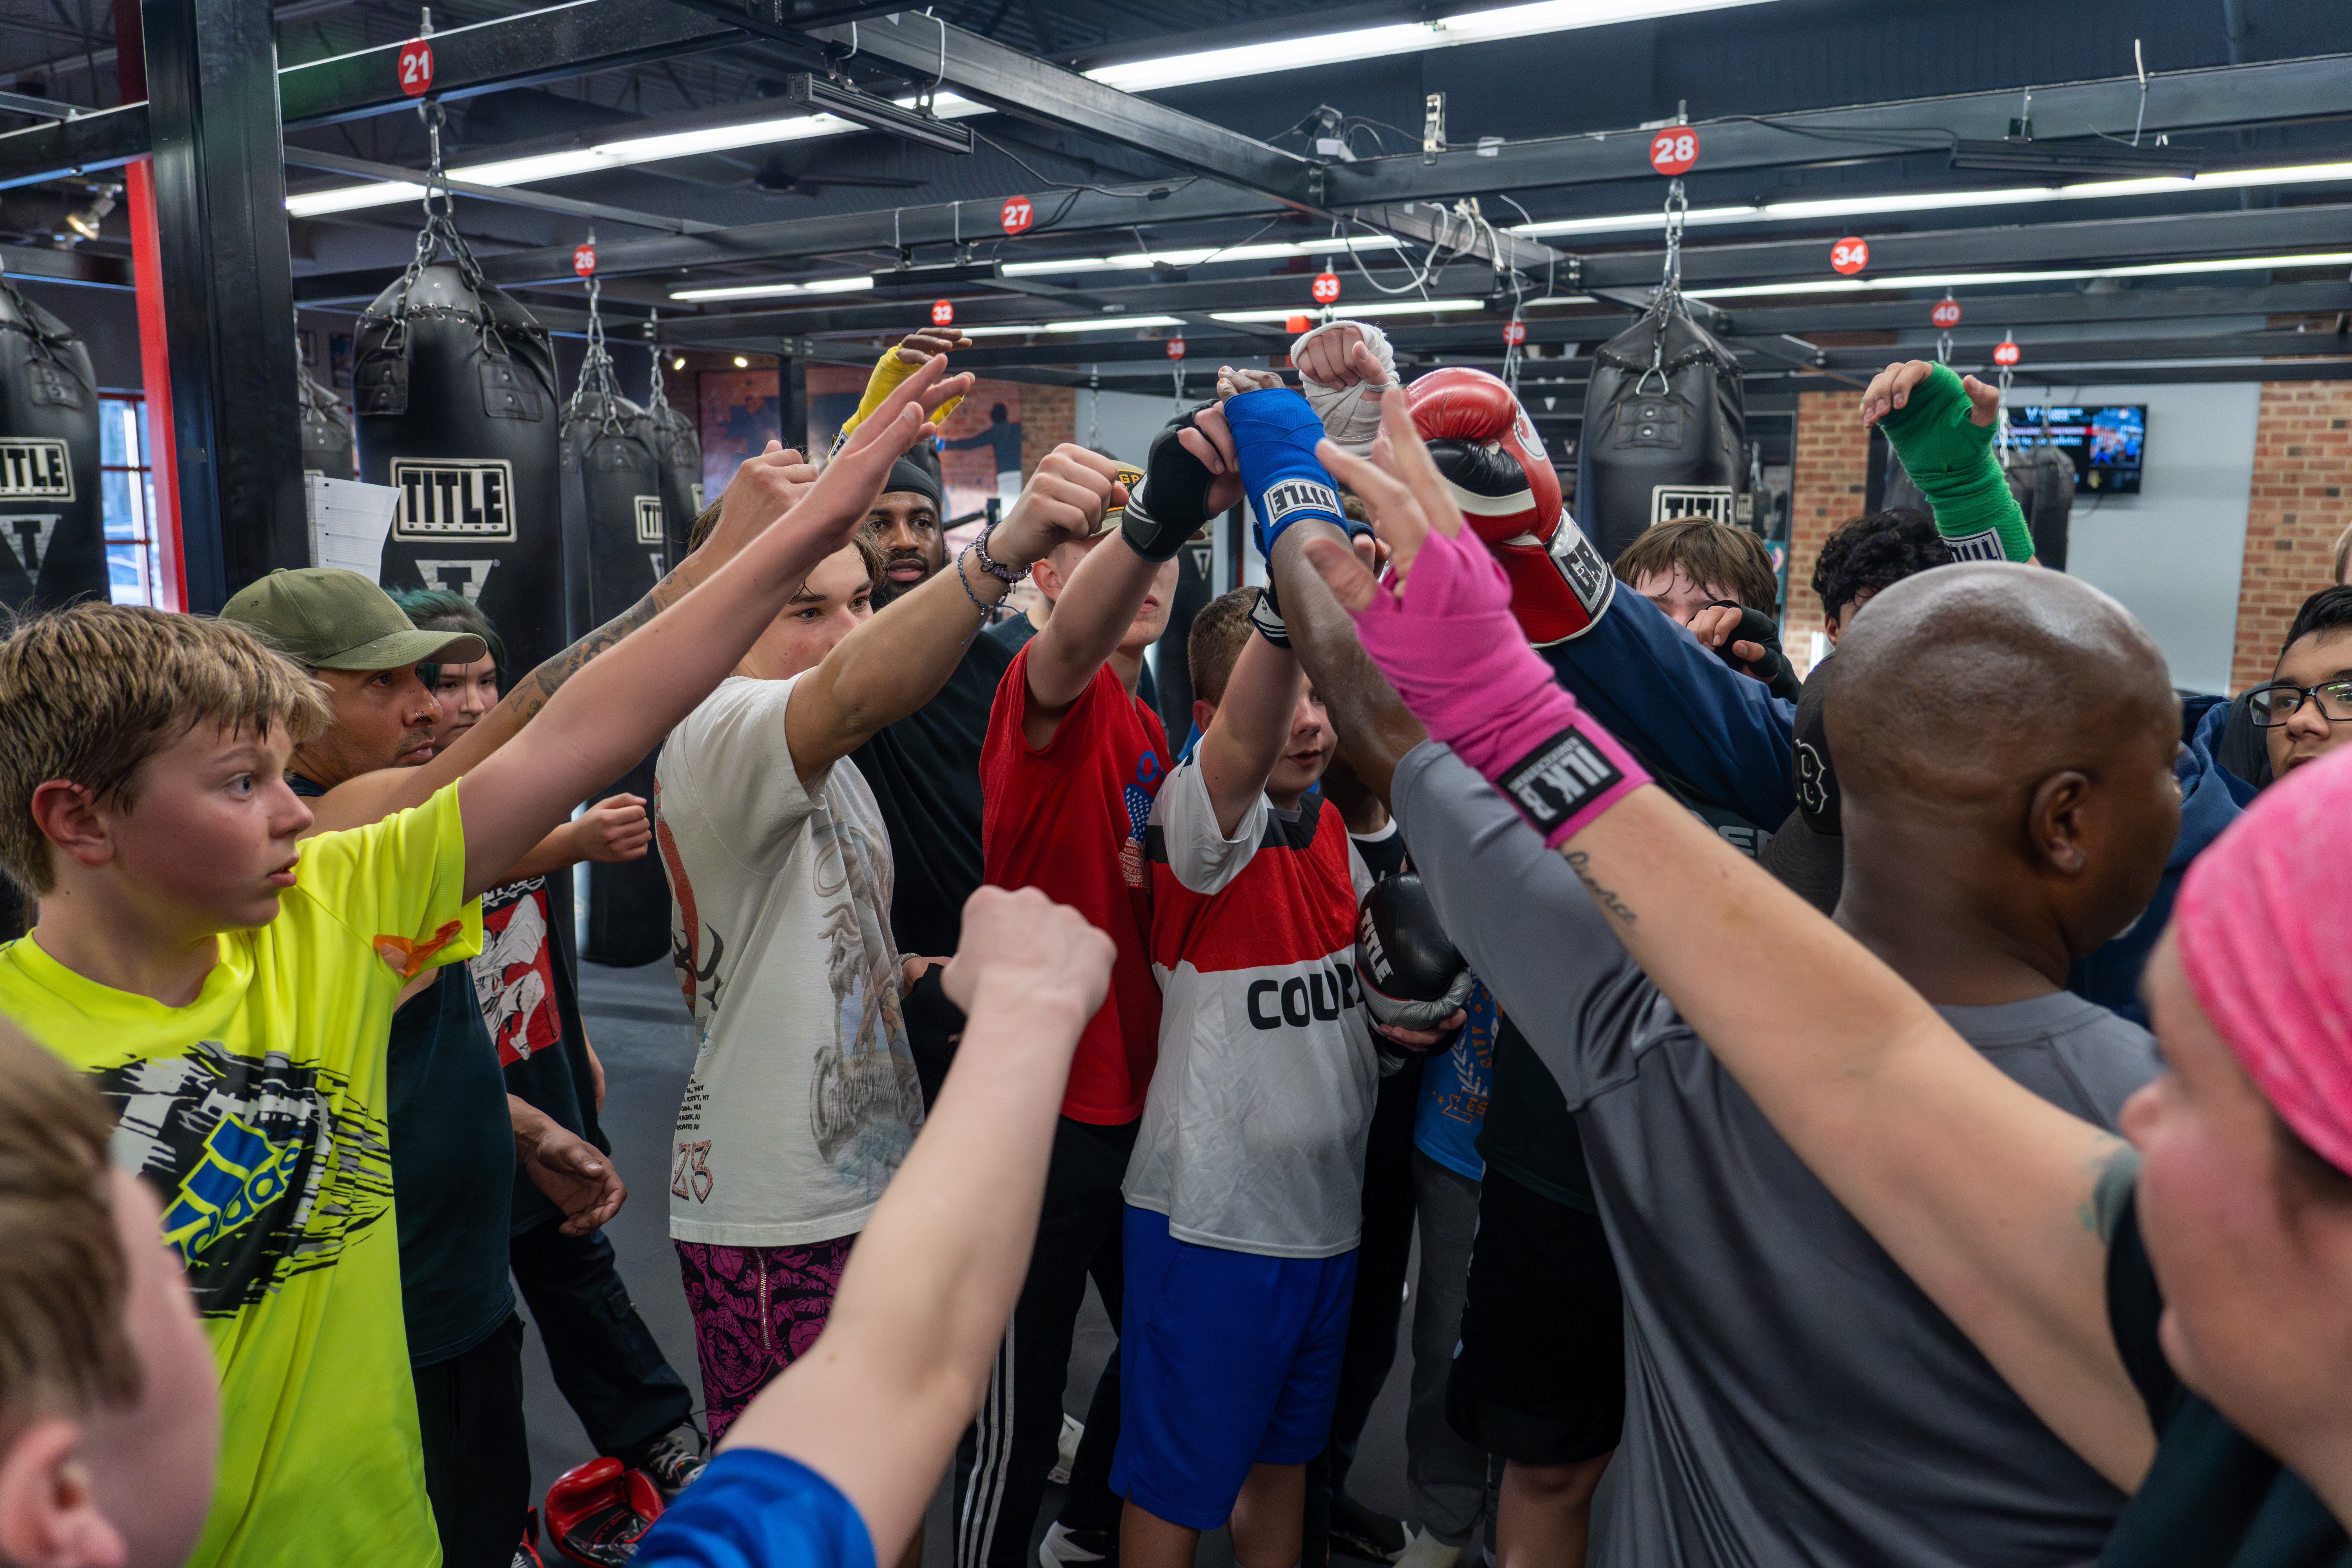 Boltz Boxing Club members support each other with a group high five.